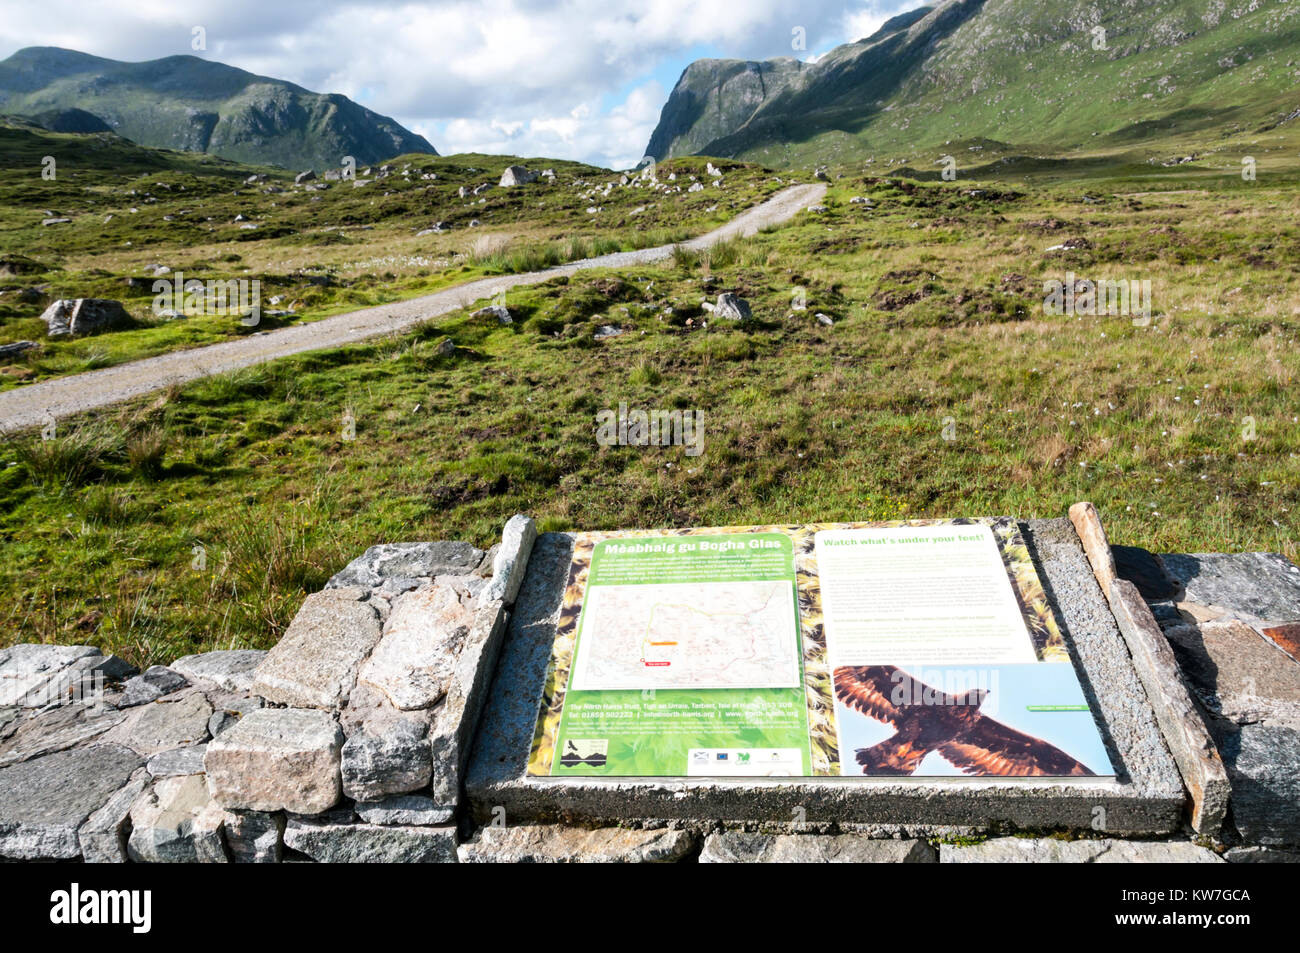 An interpretative sign for the North Harris Eagle Observatory at the southern end of Glen Meavaig on the Island of Harris in the Outer Hebrides. Stock Photo